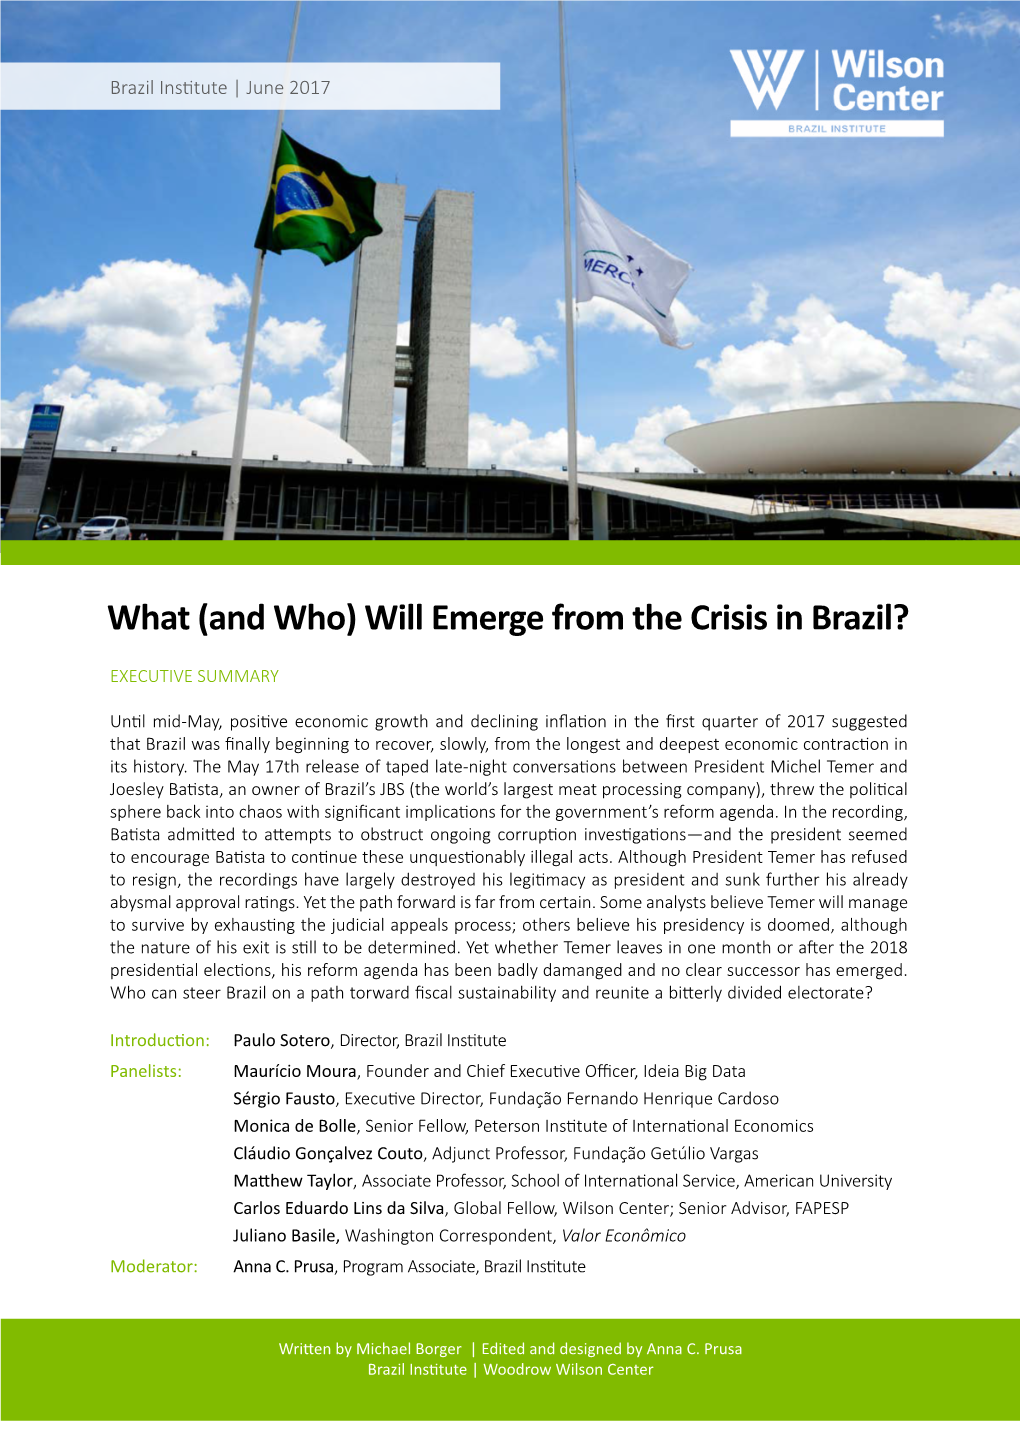 What (And Who) Will Emerge from the Crisis in Brazil?